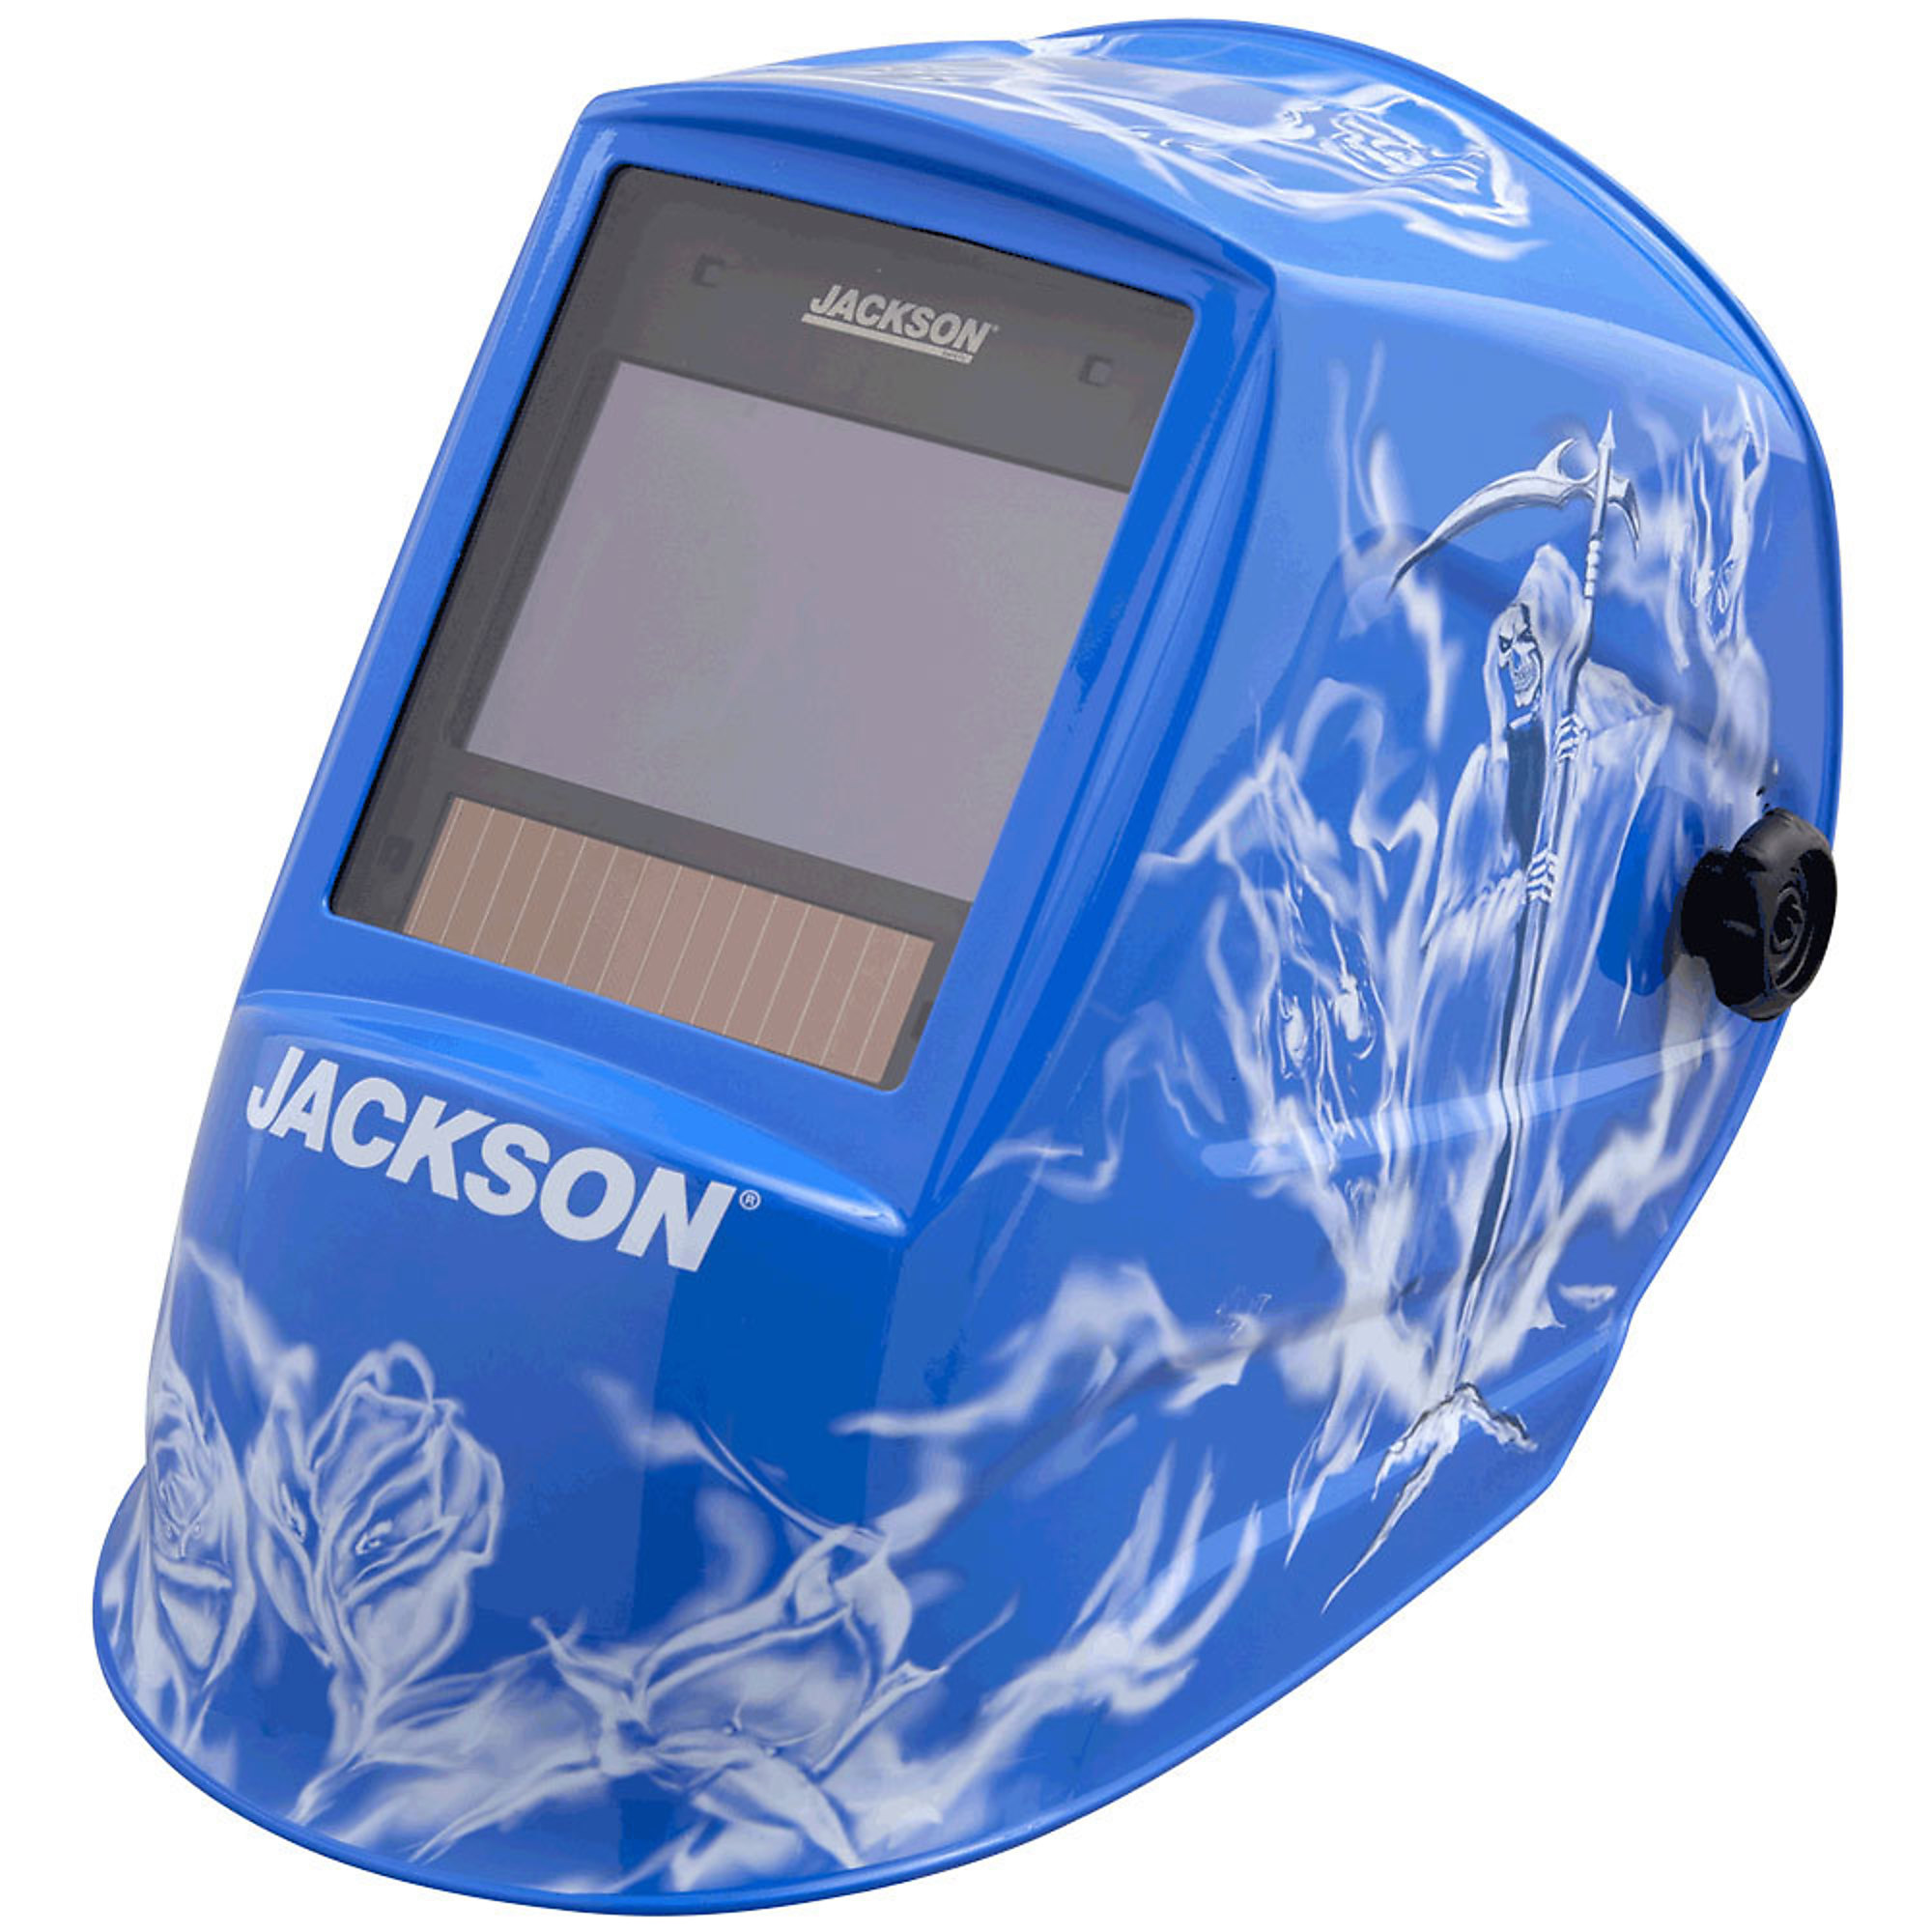 Jackson Safety, Reapers N' Roses Graphic Premium ADF Weld Helmet, Auto Darkening, Switch Time 1/25,000 sec., Grind Mode, Model 47104